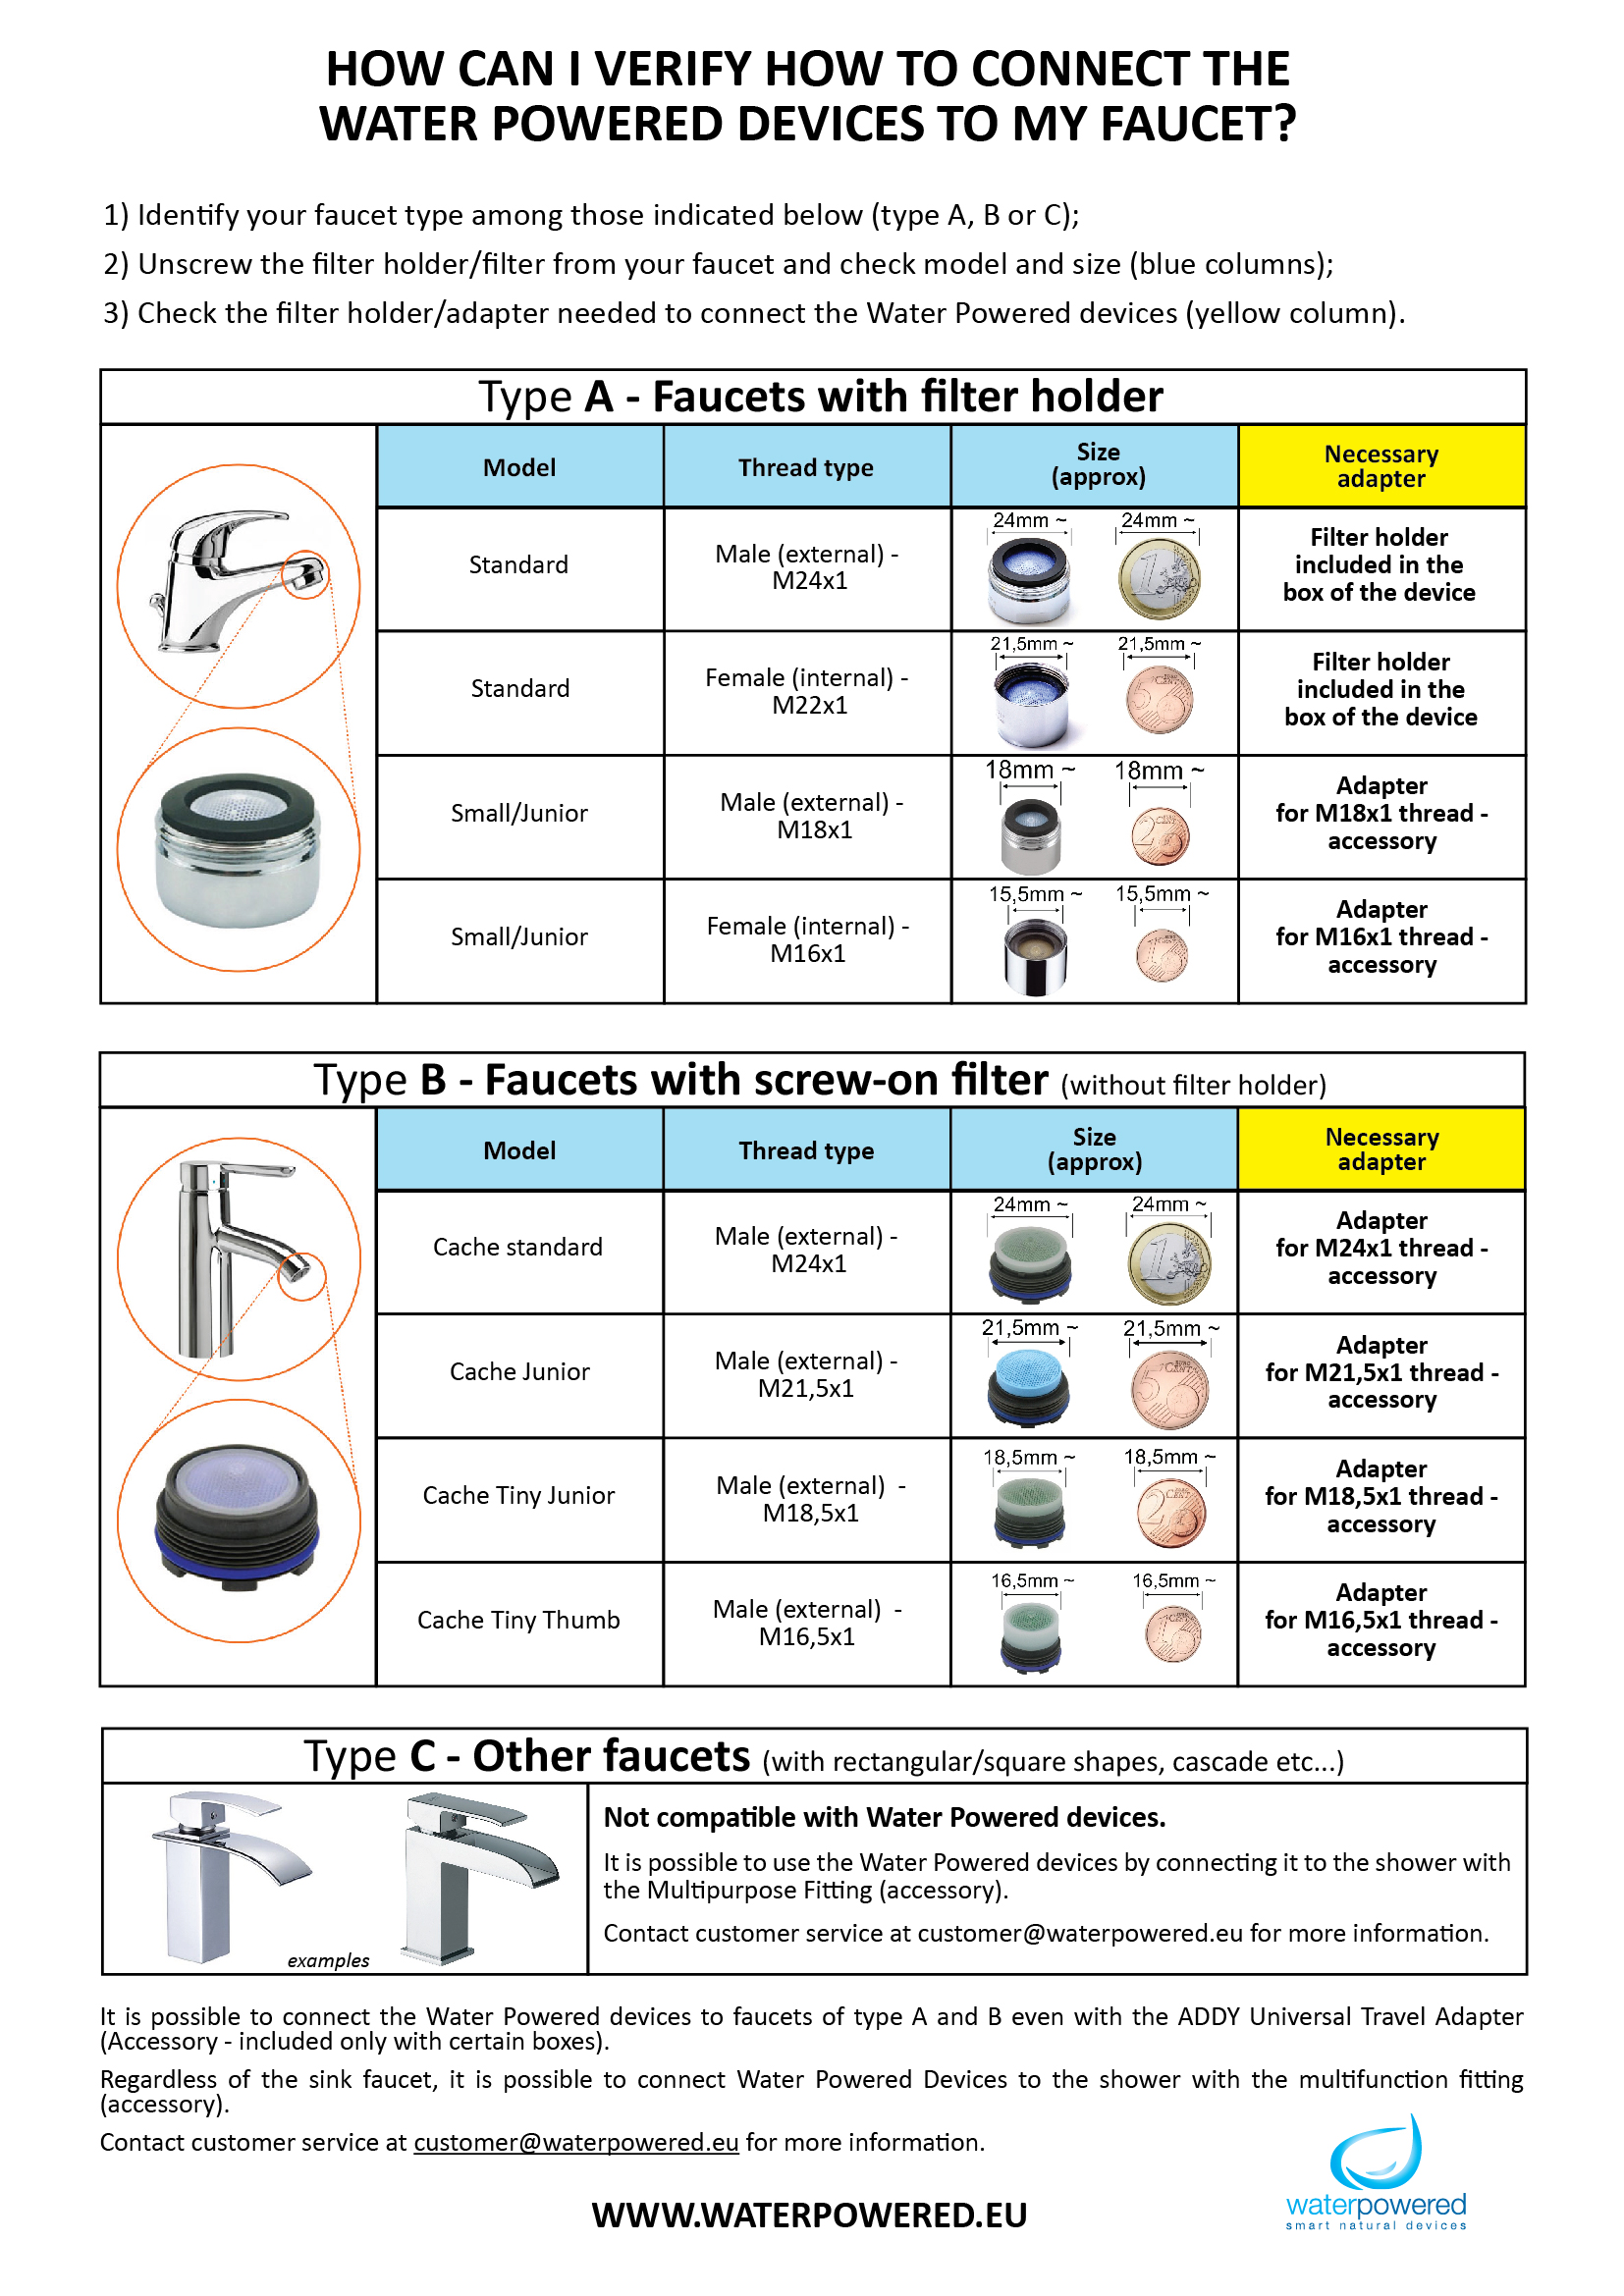 Check to see if your faucet is compatible with our Water Powered adapters